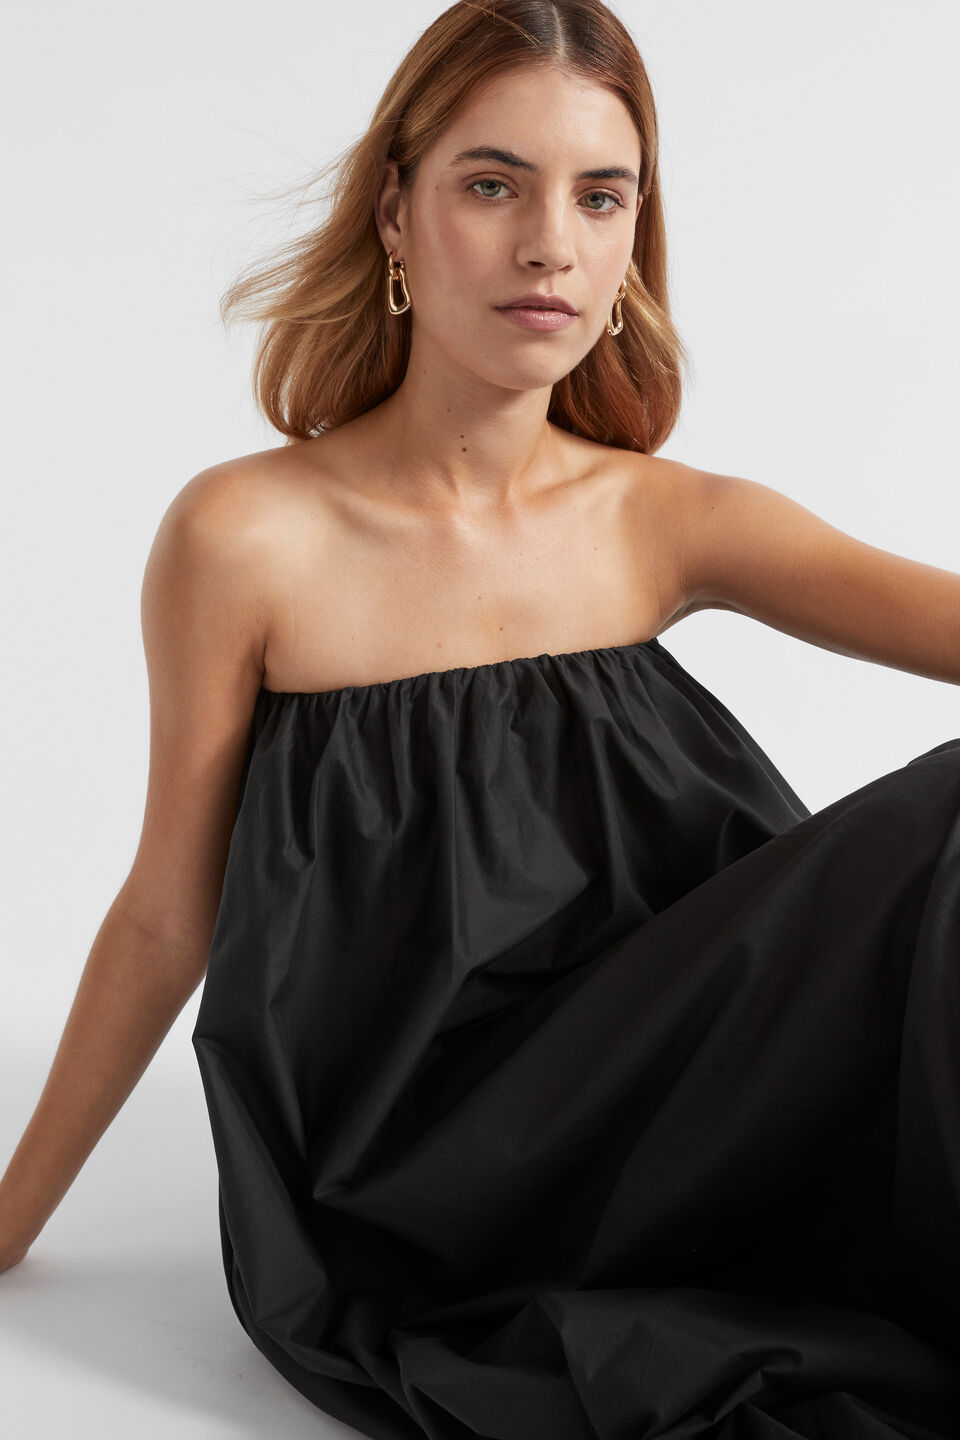 Voile Gathered Strapless Maxi Dress  Black